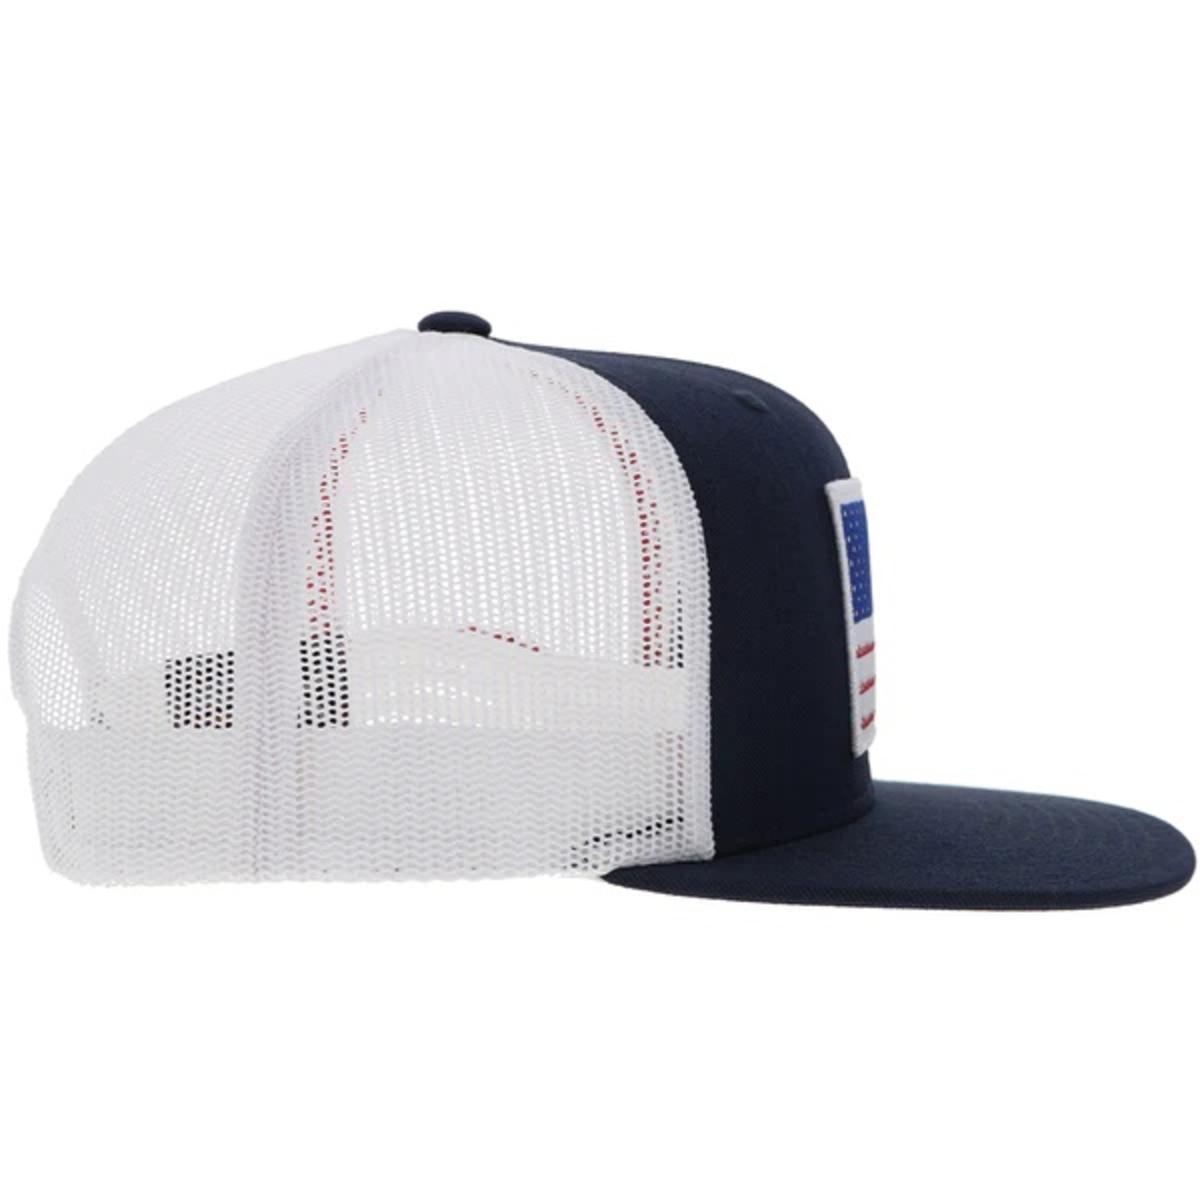 HOOEY  "LIBERTY ROPER" HAT NAVY/WHITE W/ FLAG PATCH